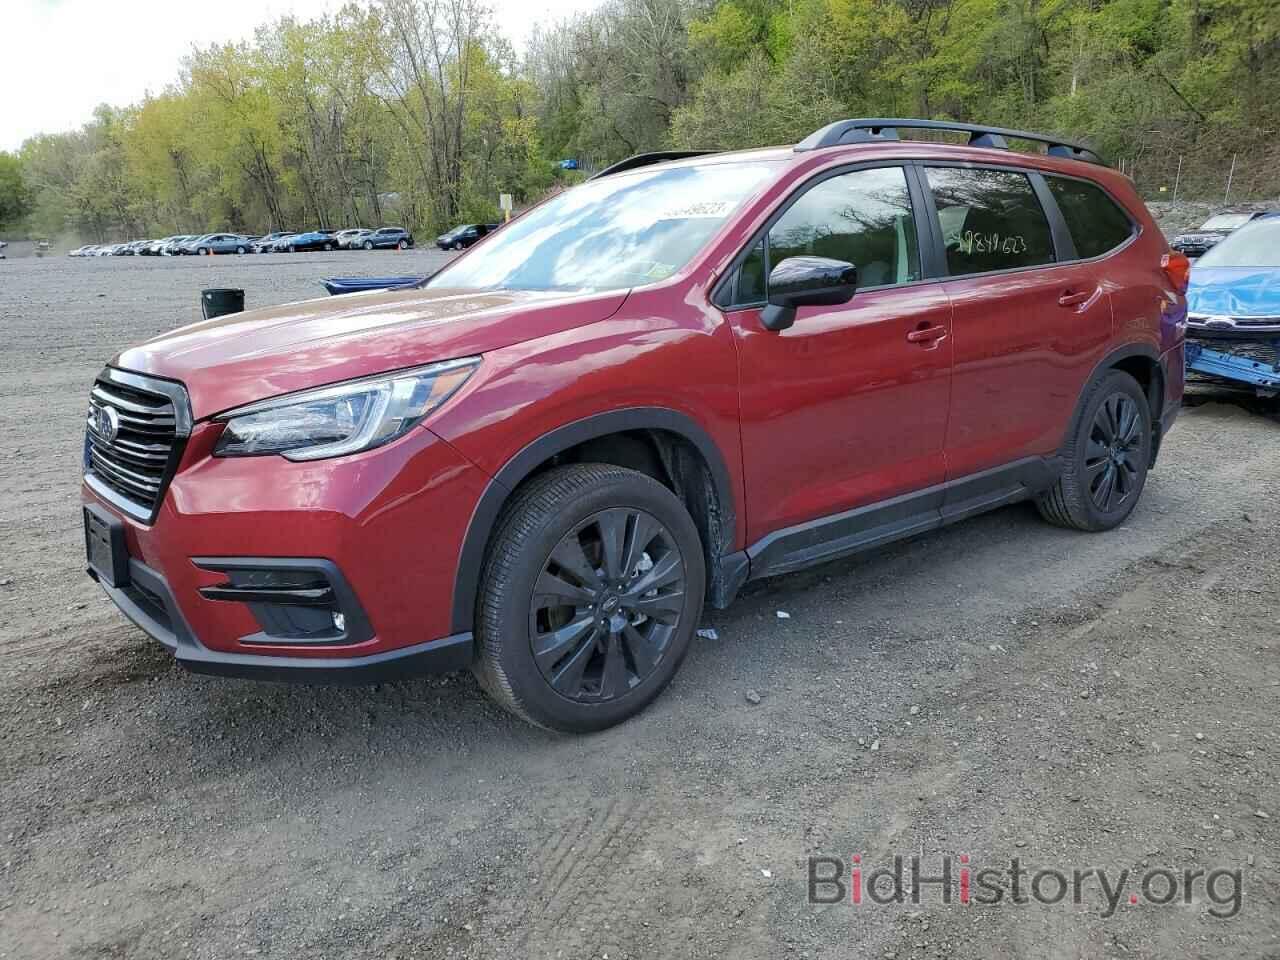 Photo 4S4WMAGD6N3465817 - SUBARU ASCENT ONY 2022